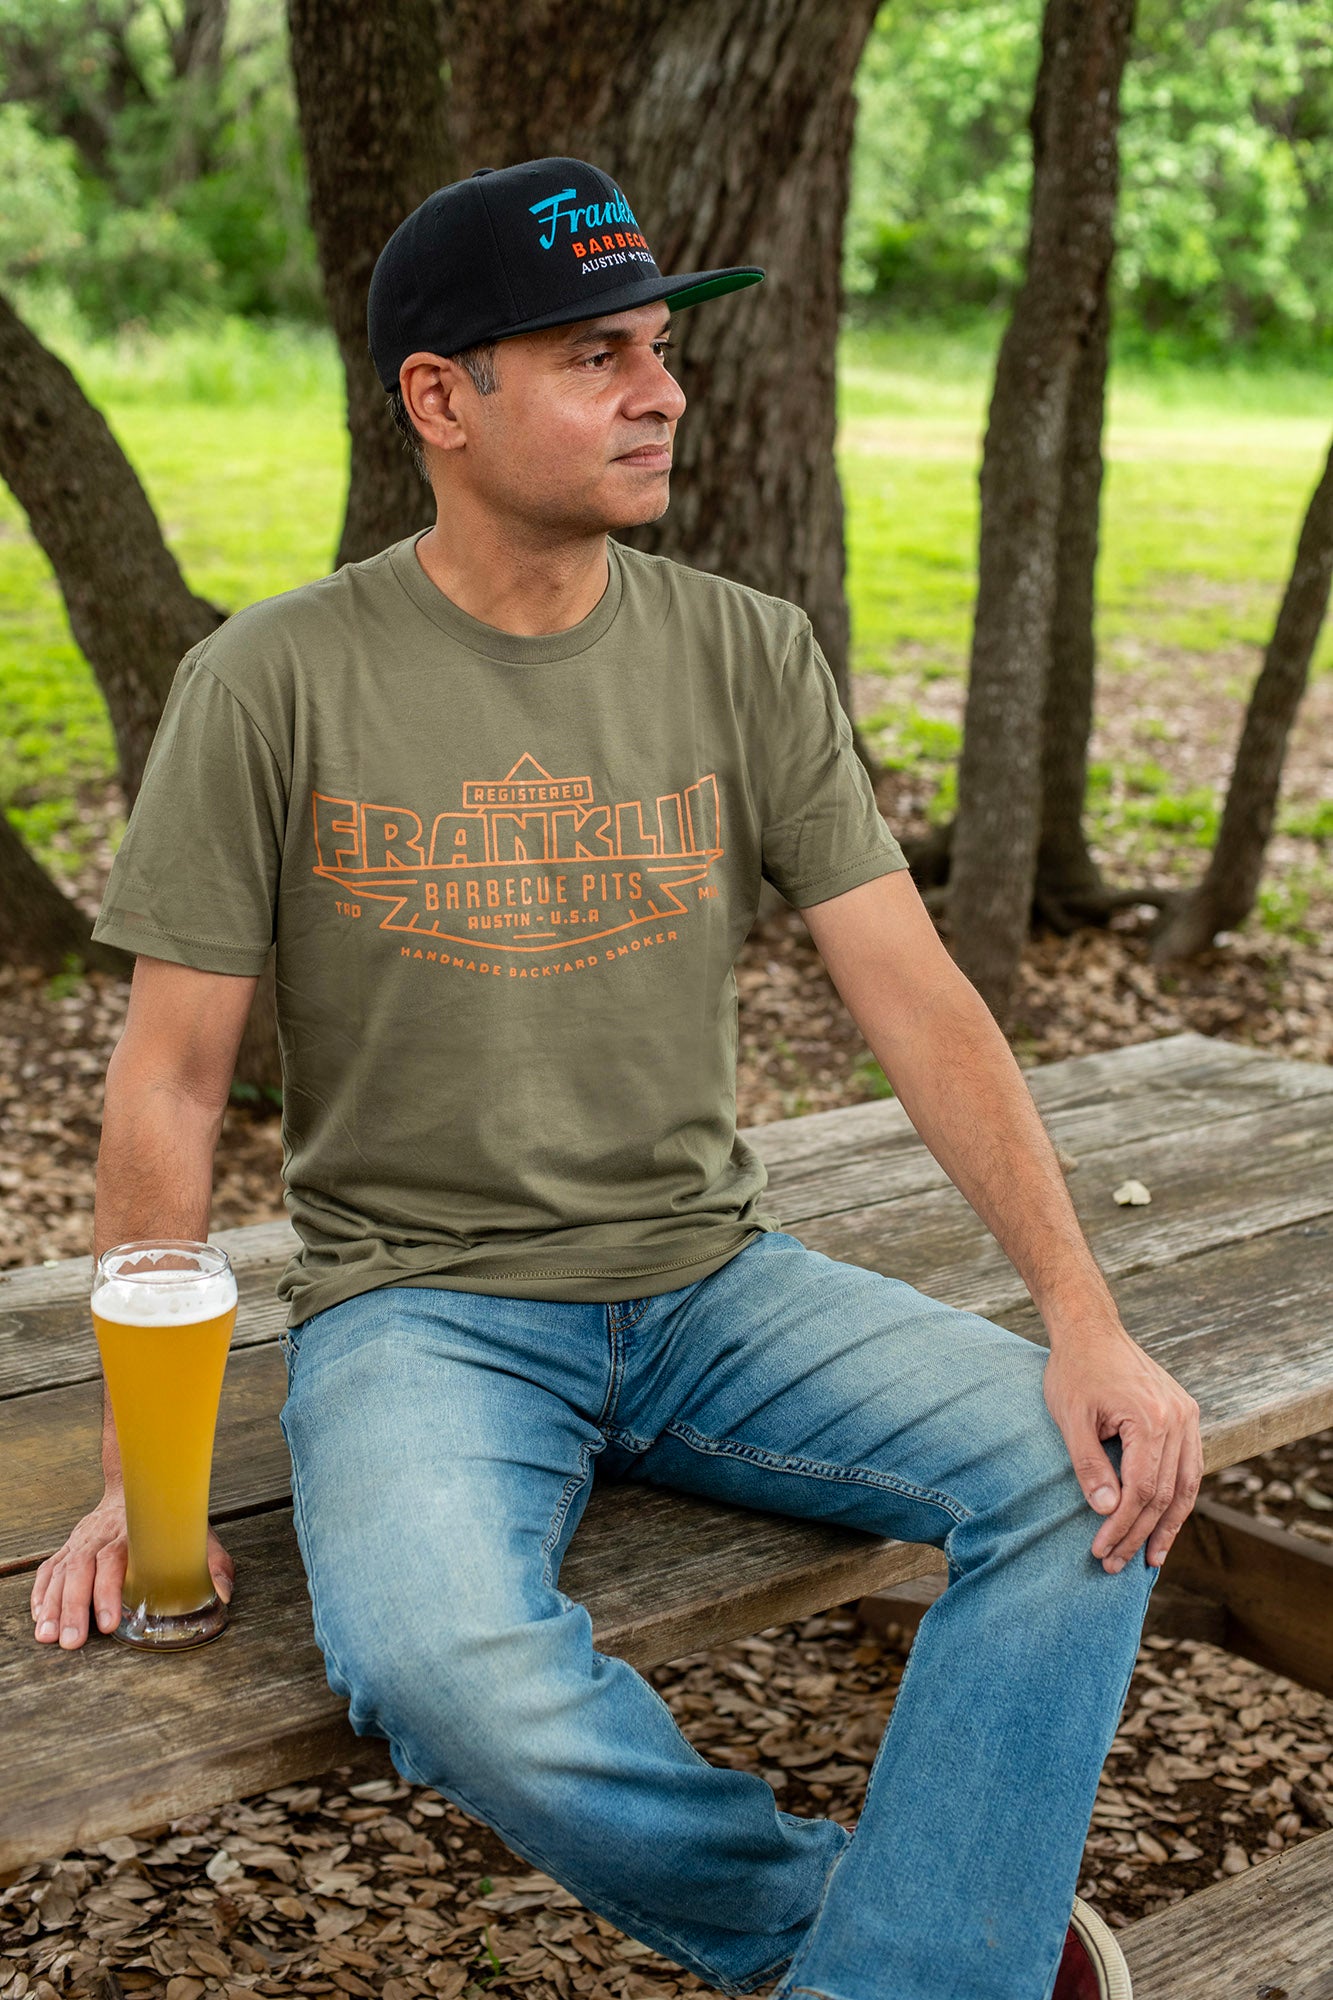 Man sits with a beer, wearing the Army Green t-shirt with Registered Franklin Barbecue Pits logo in orange. He also wears a Black hat with the Franklin logo on it.